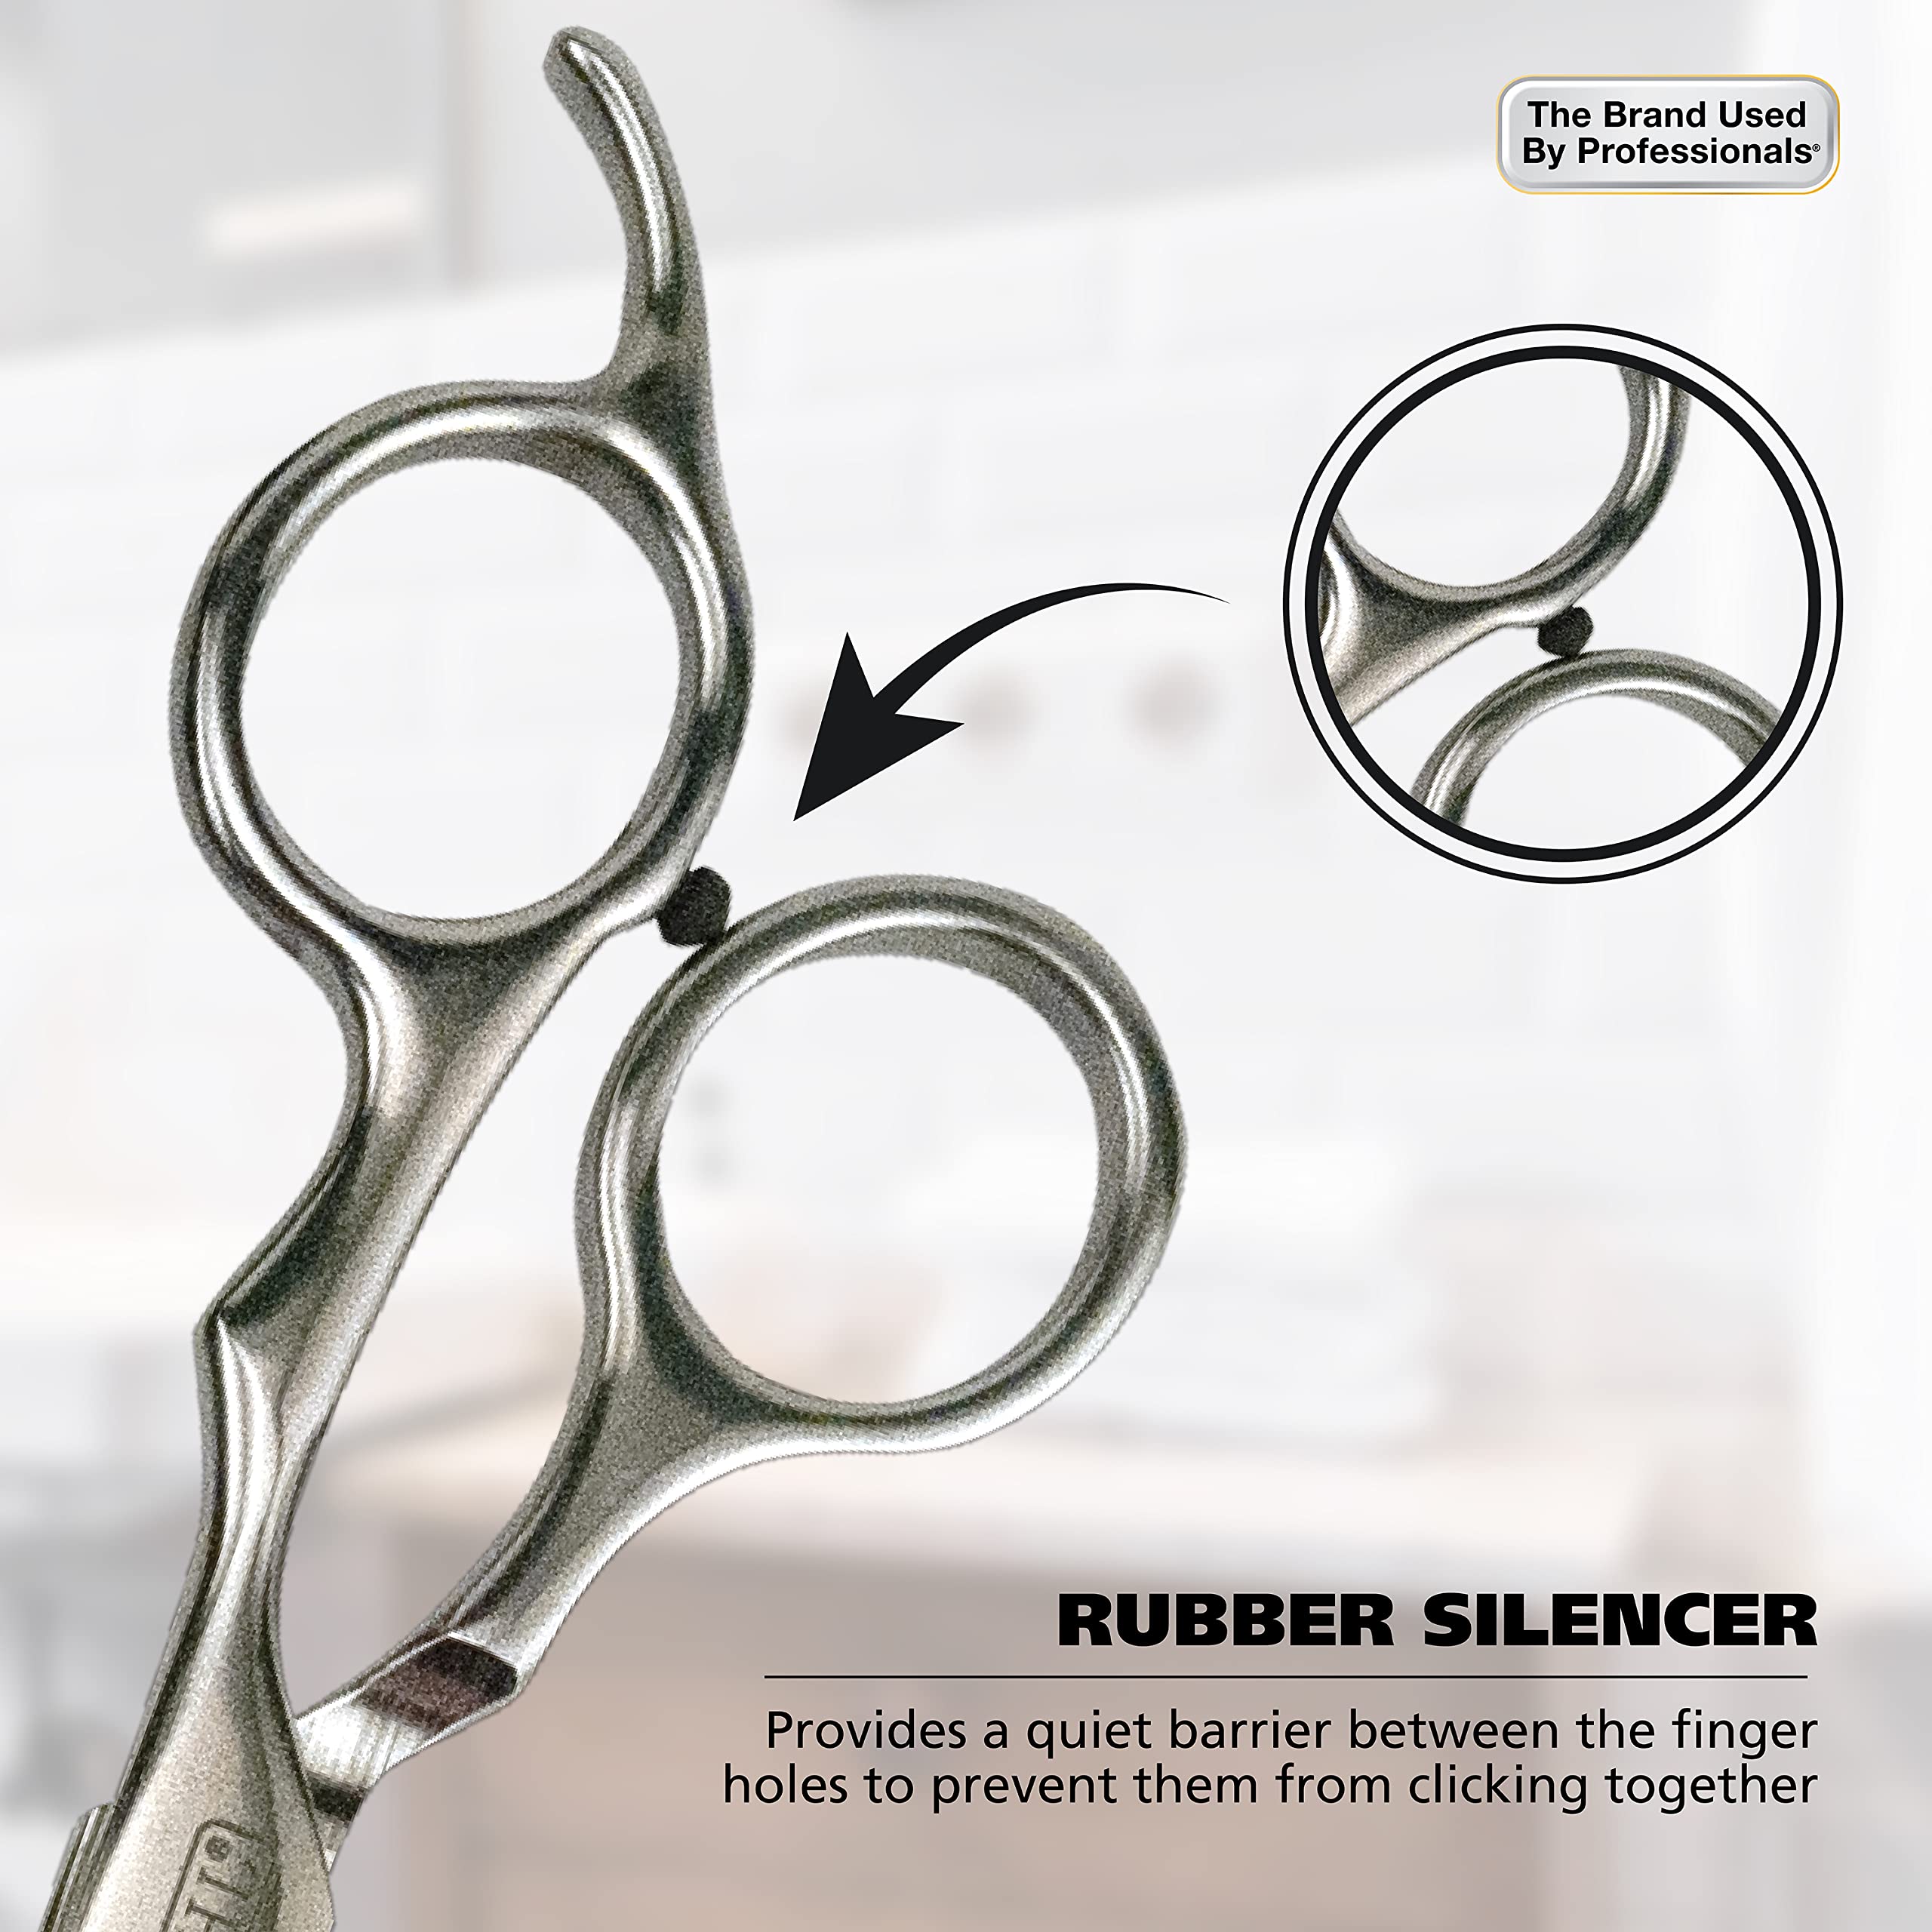 Wahl Clipper High-Performance Stainless-Steel Haircutting Shears for Extreme Precision Cutting, Trimming at Home - Model 3012